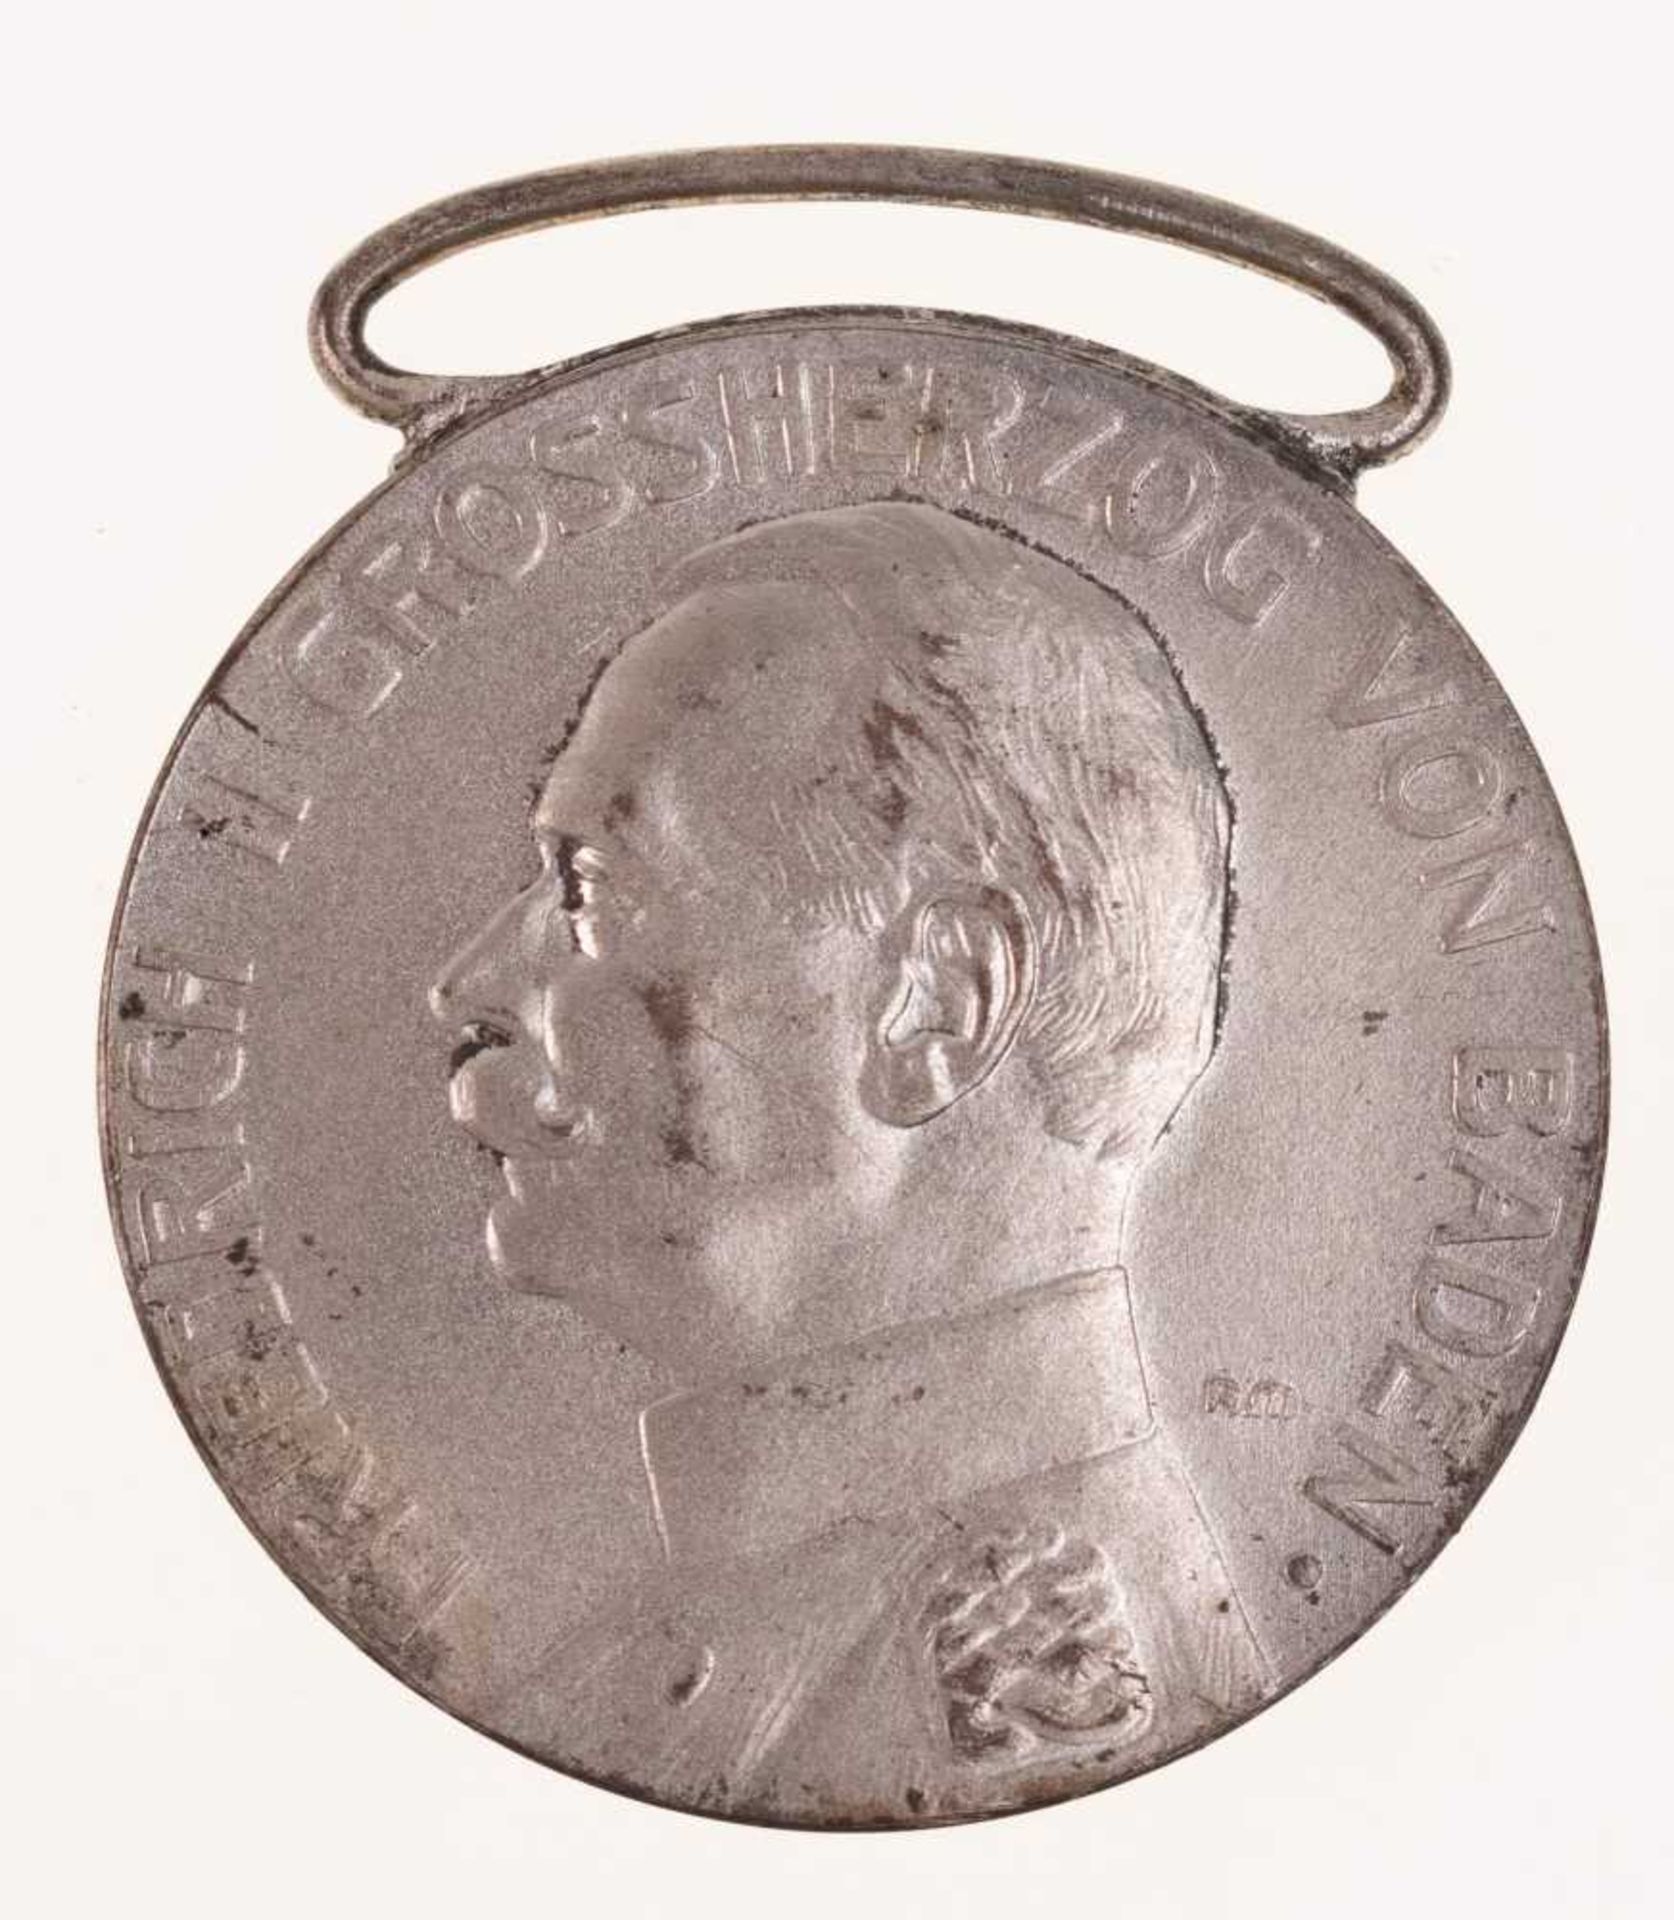 Baden, silver Medal for Merit (12916-1918), Friedrich II., iron silver-plated, OEK 215, condition 2-